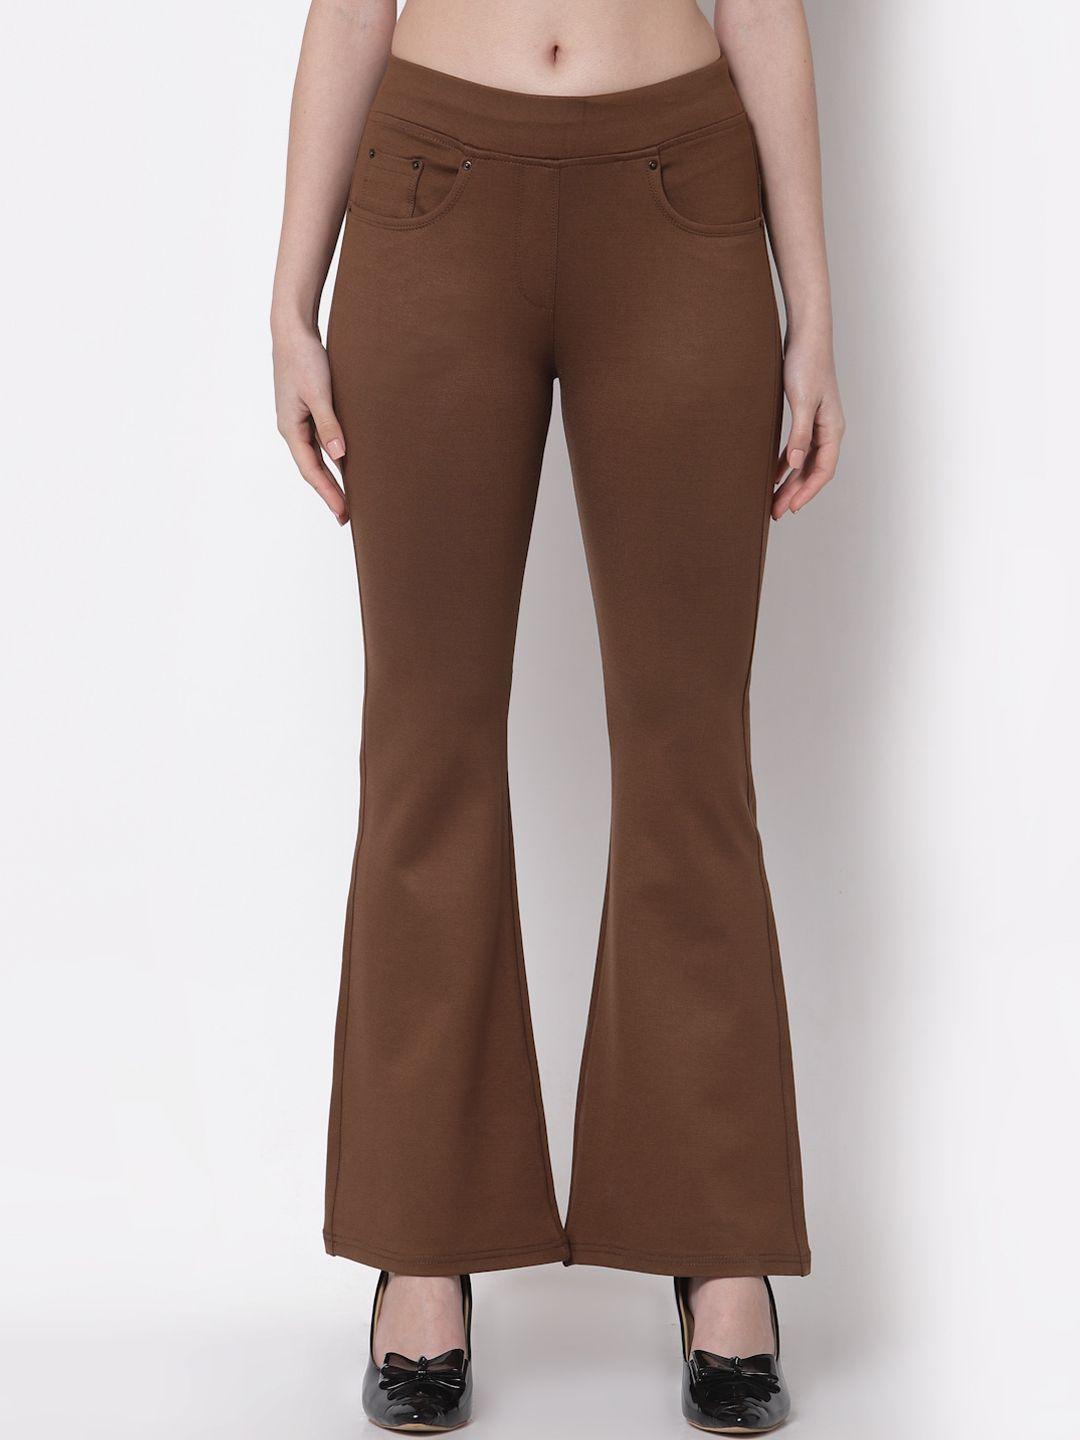 westwood-women-brown-high-rise-trousers